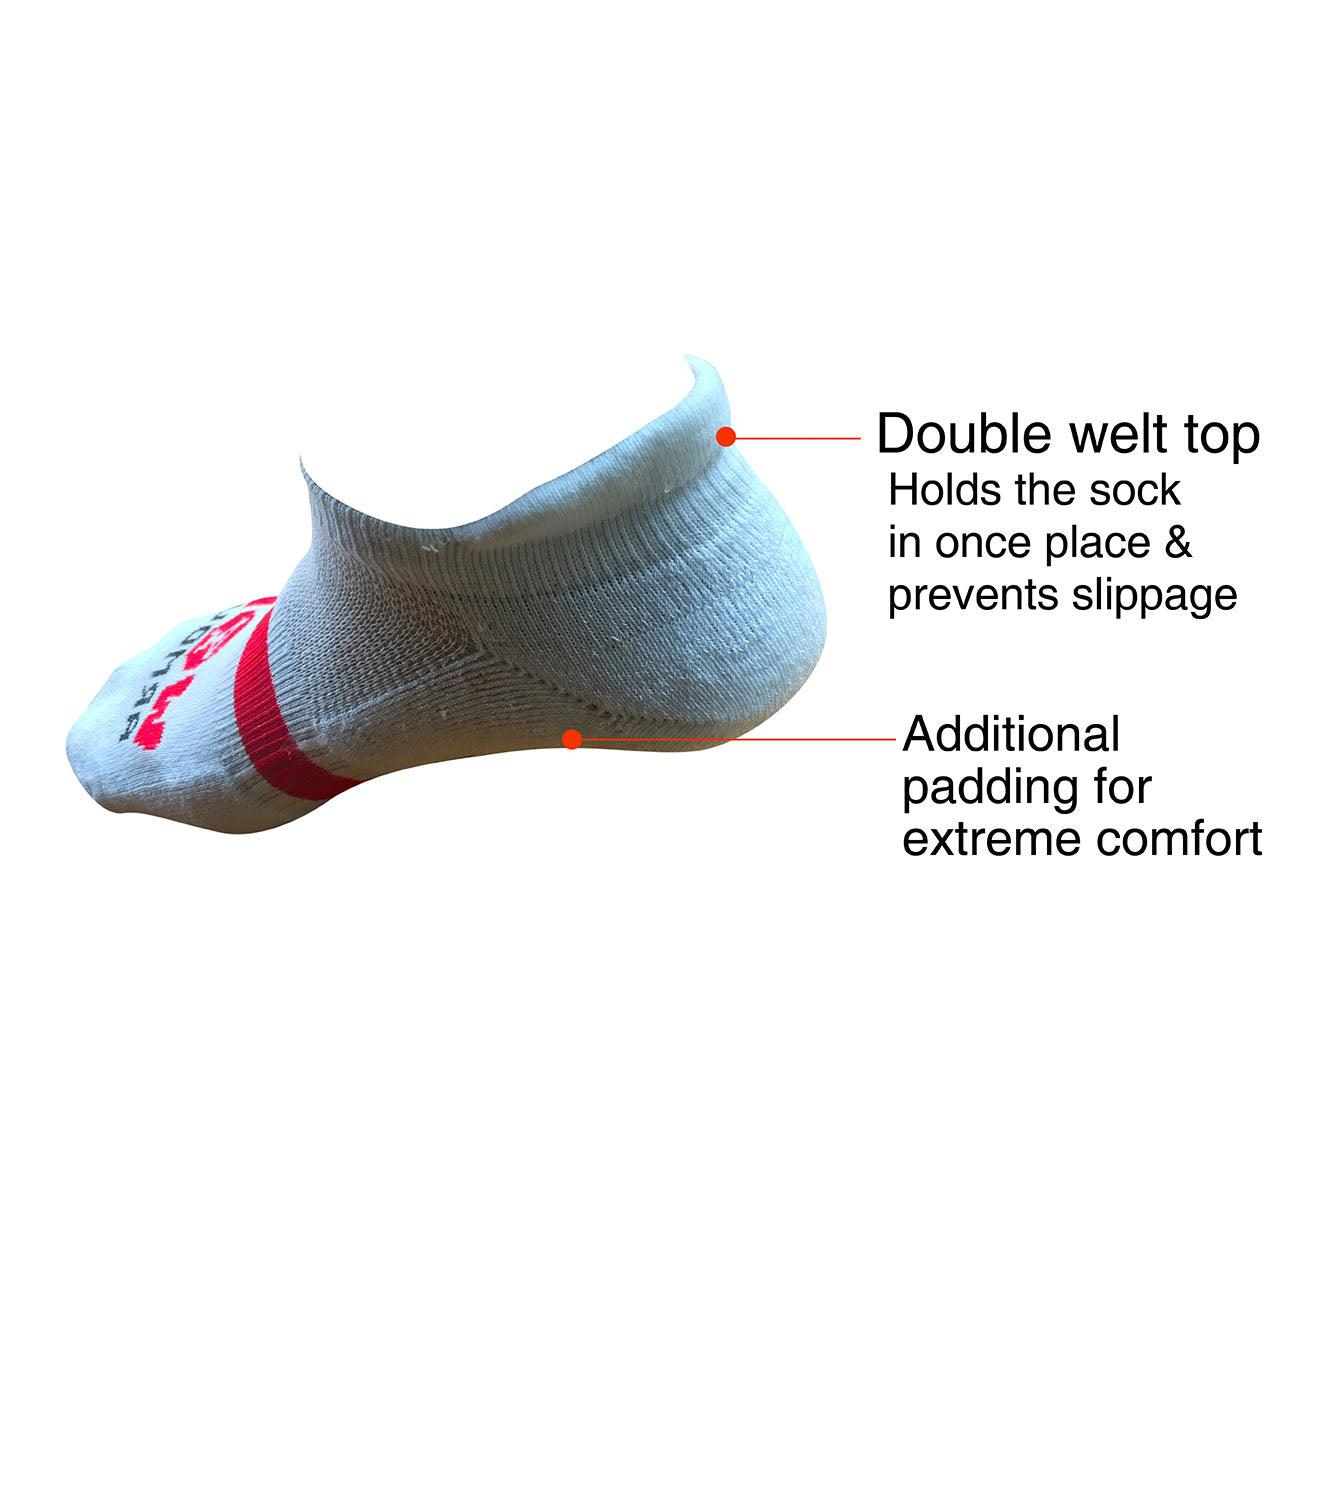 Load image into Gallery viewer, Ankle Length Breathable Training Socks White - wodarmour
